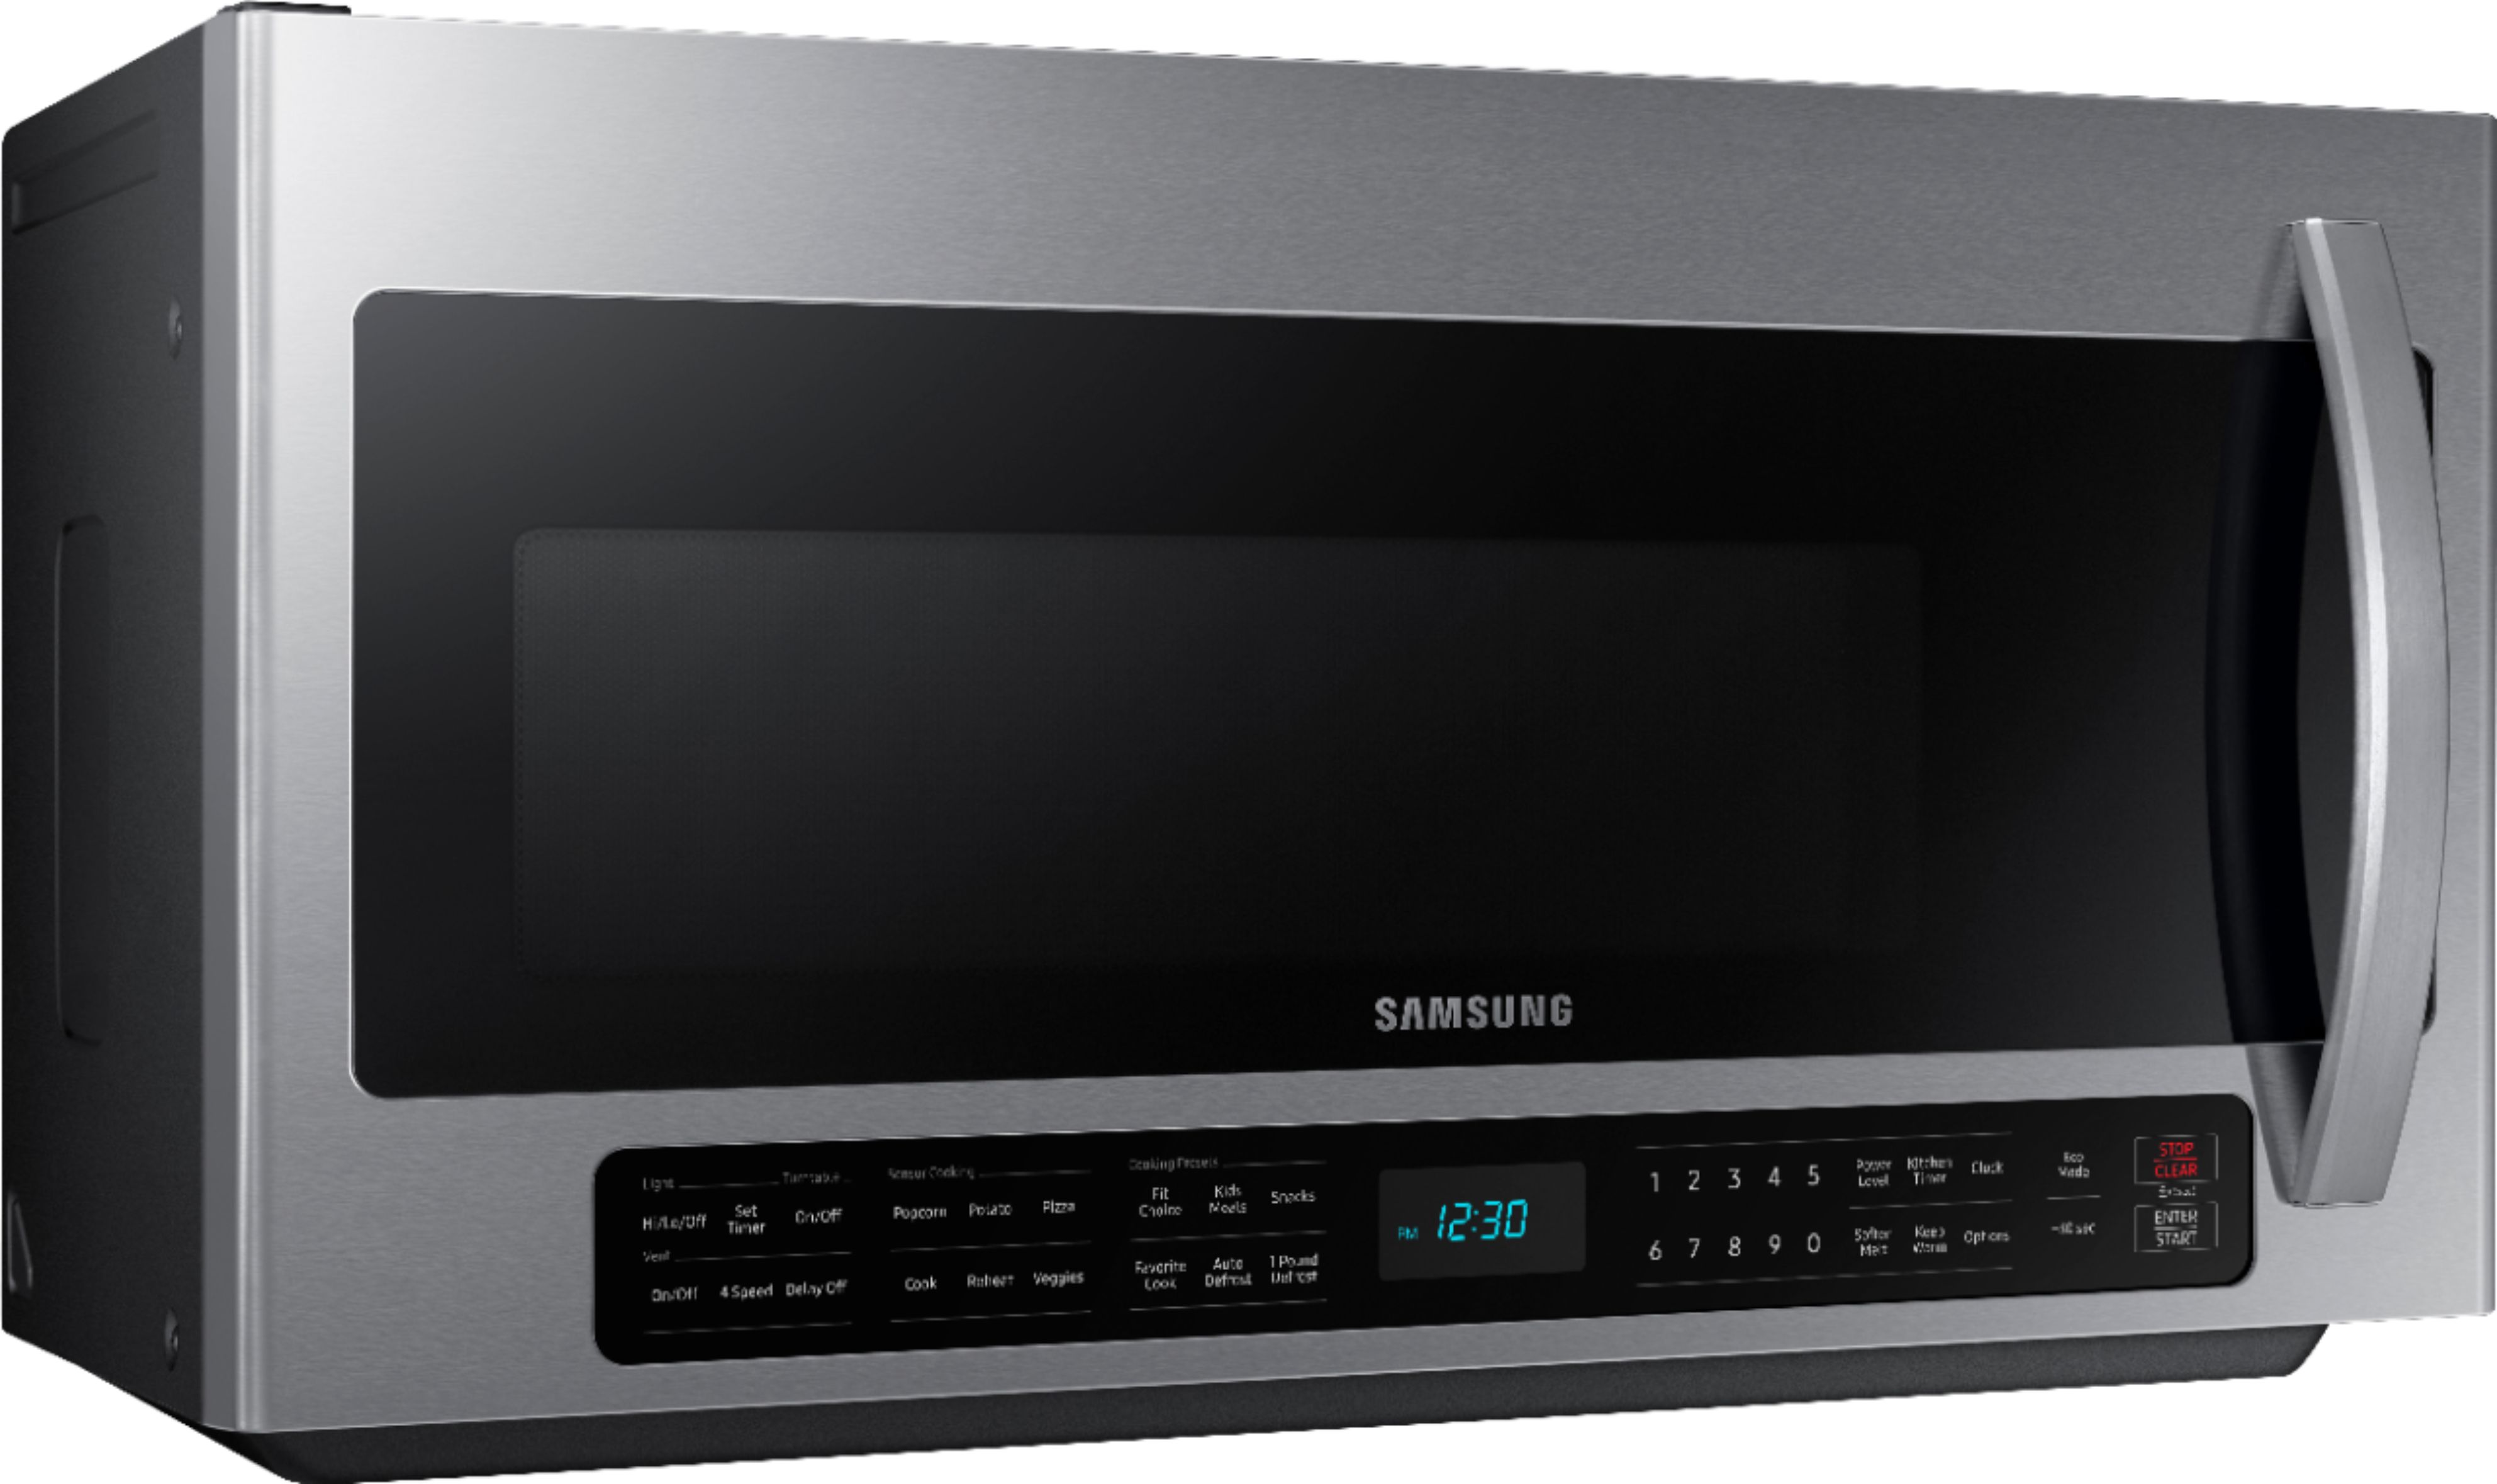 Angle View: Frigidaire - Gallery 1.7 Cu. Ft. Over-the-Range Microwave with Sensor Cooking - Black